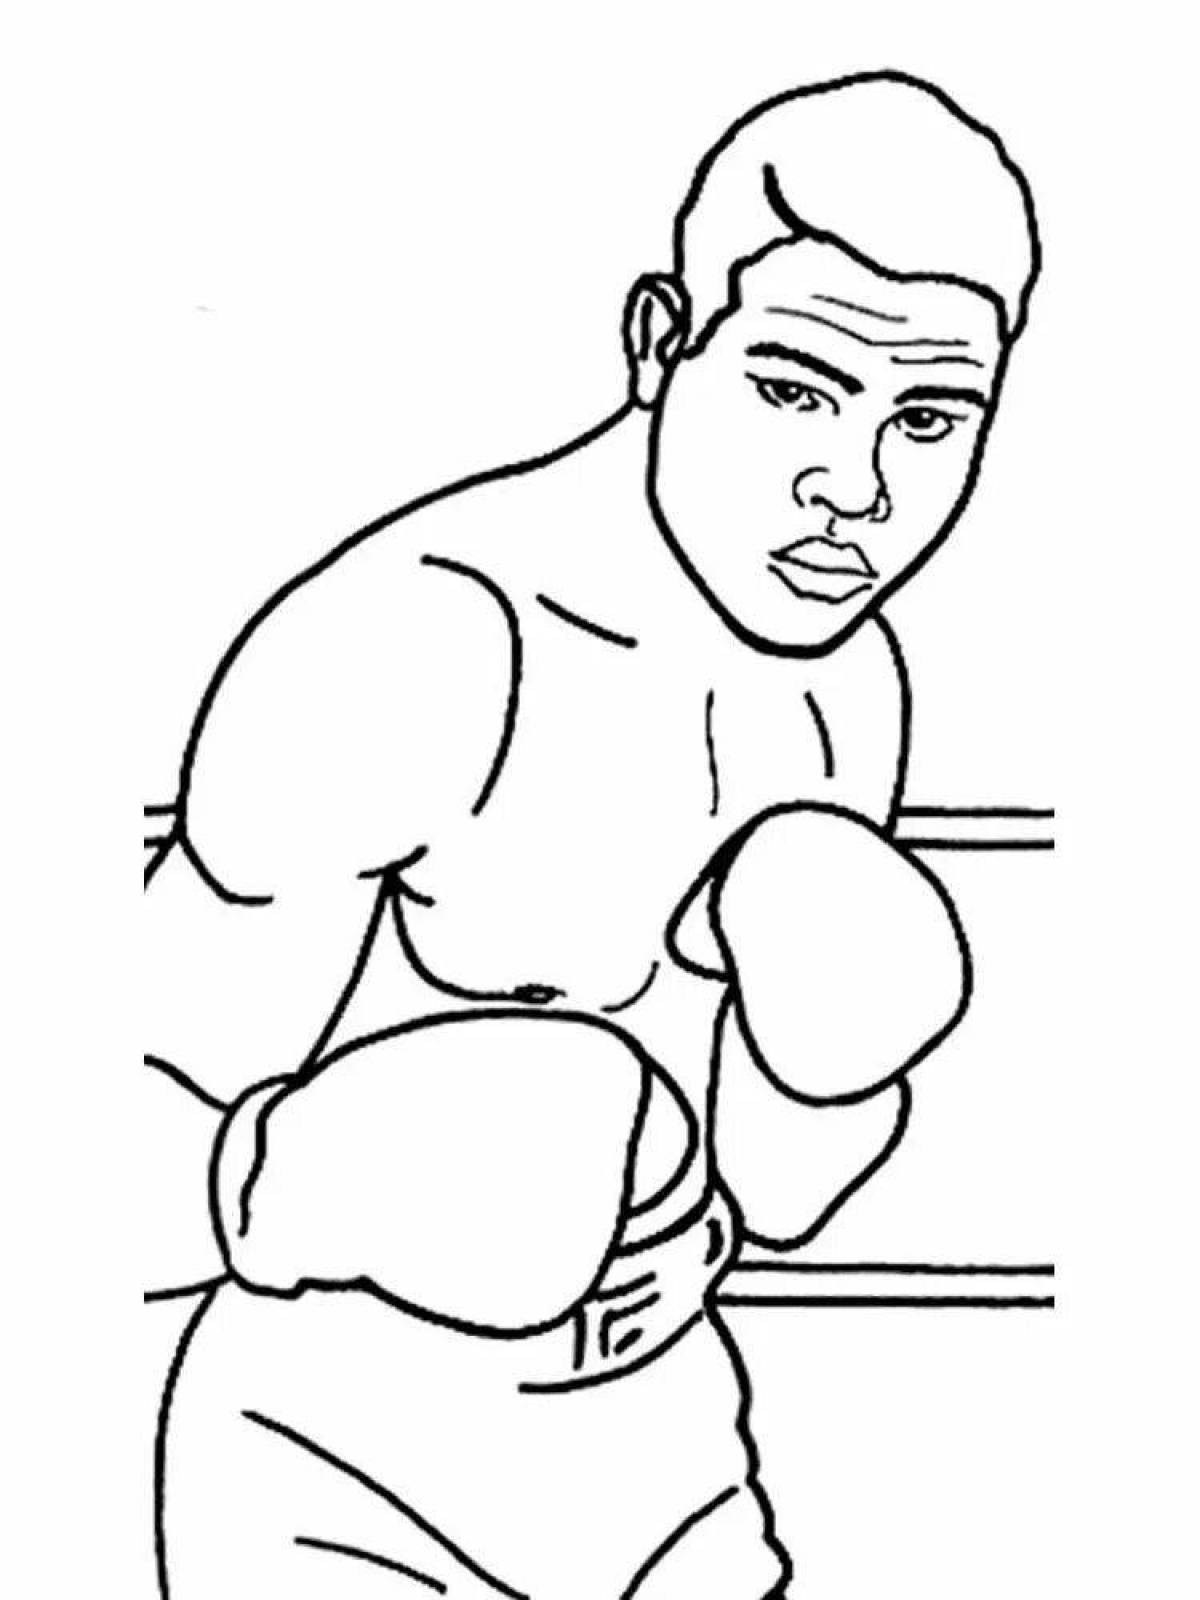 Courageous boxer coloring page